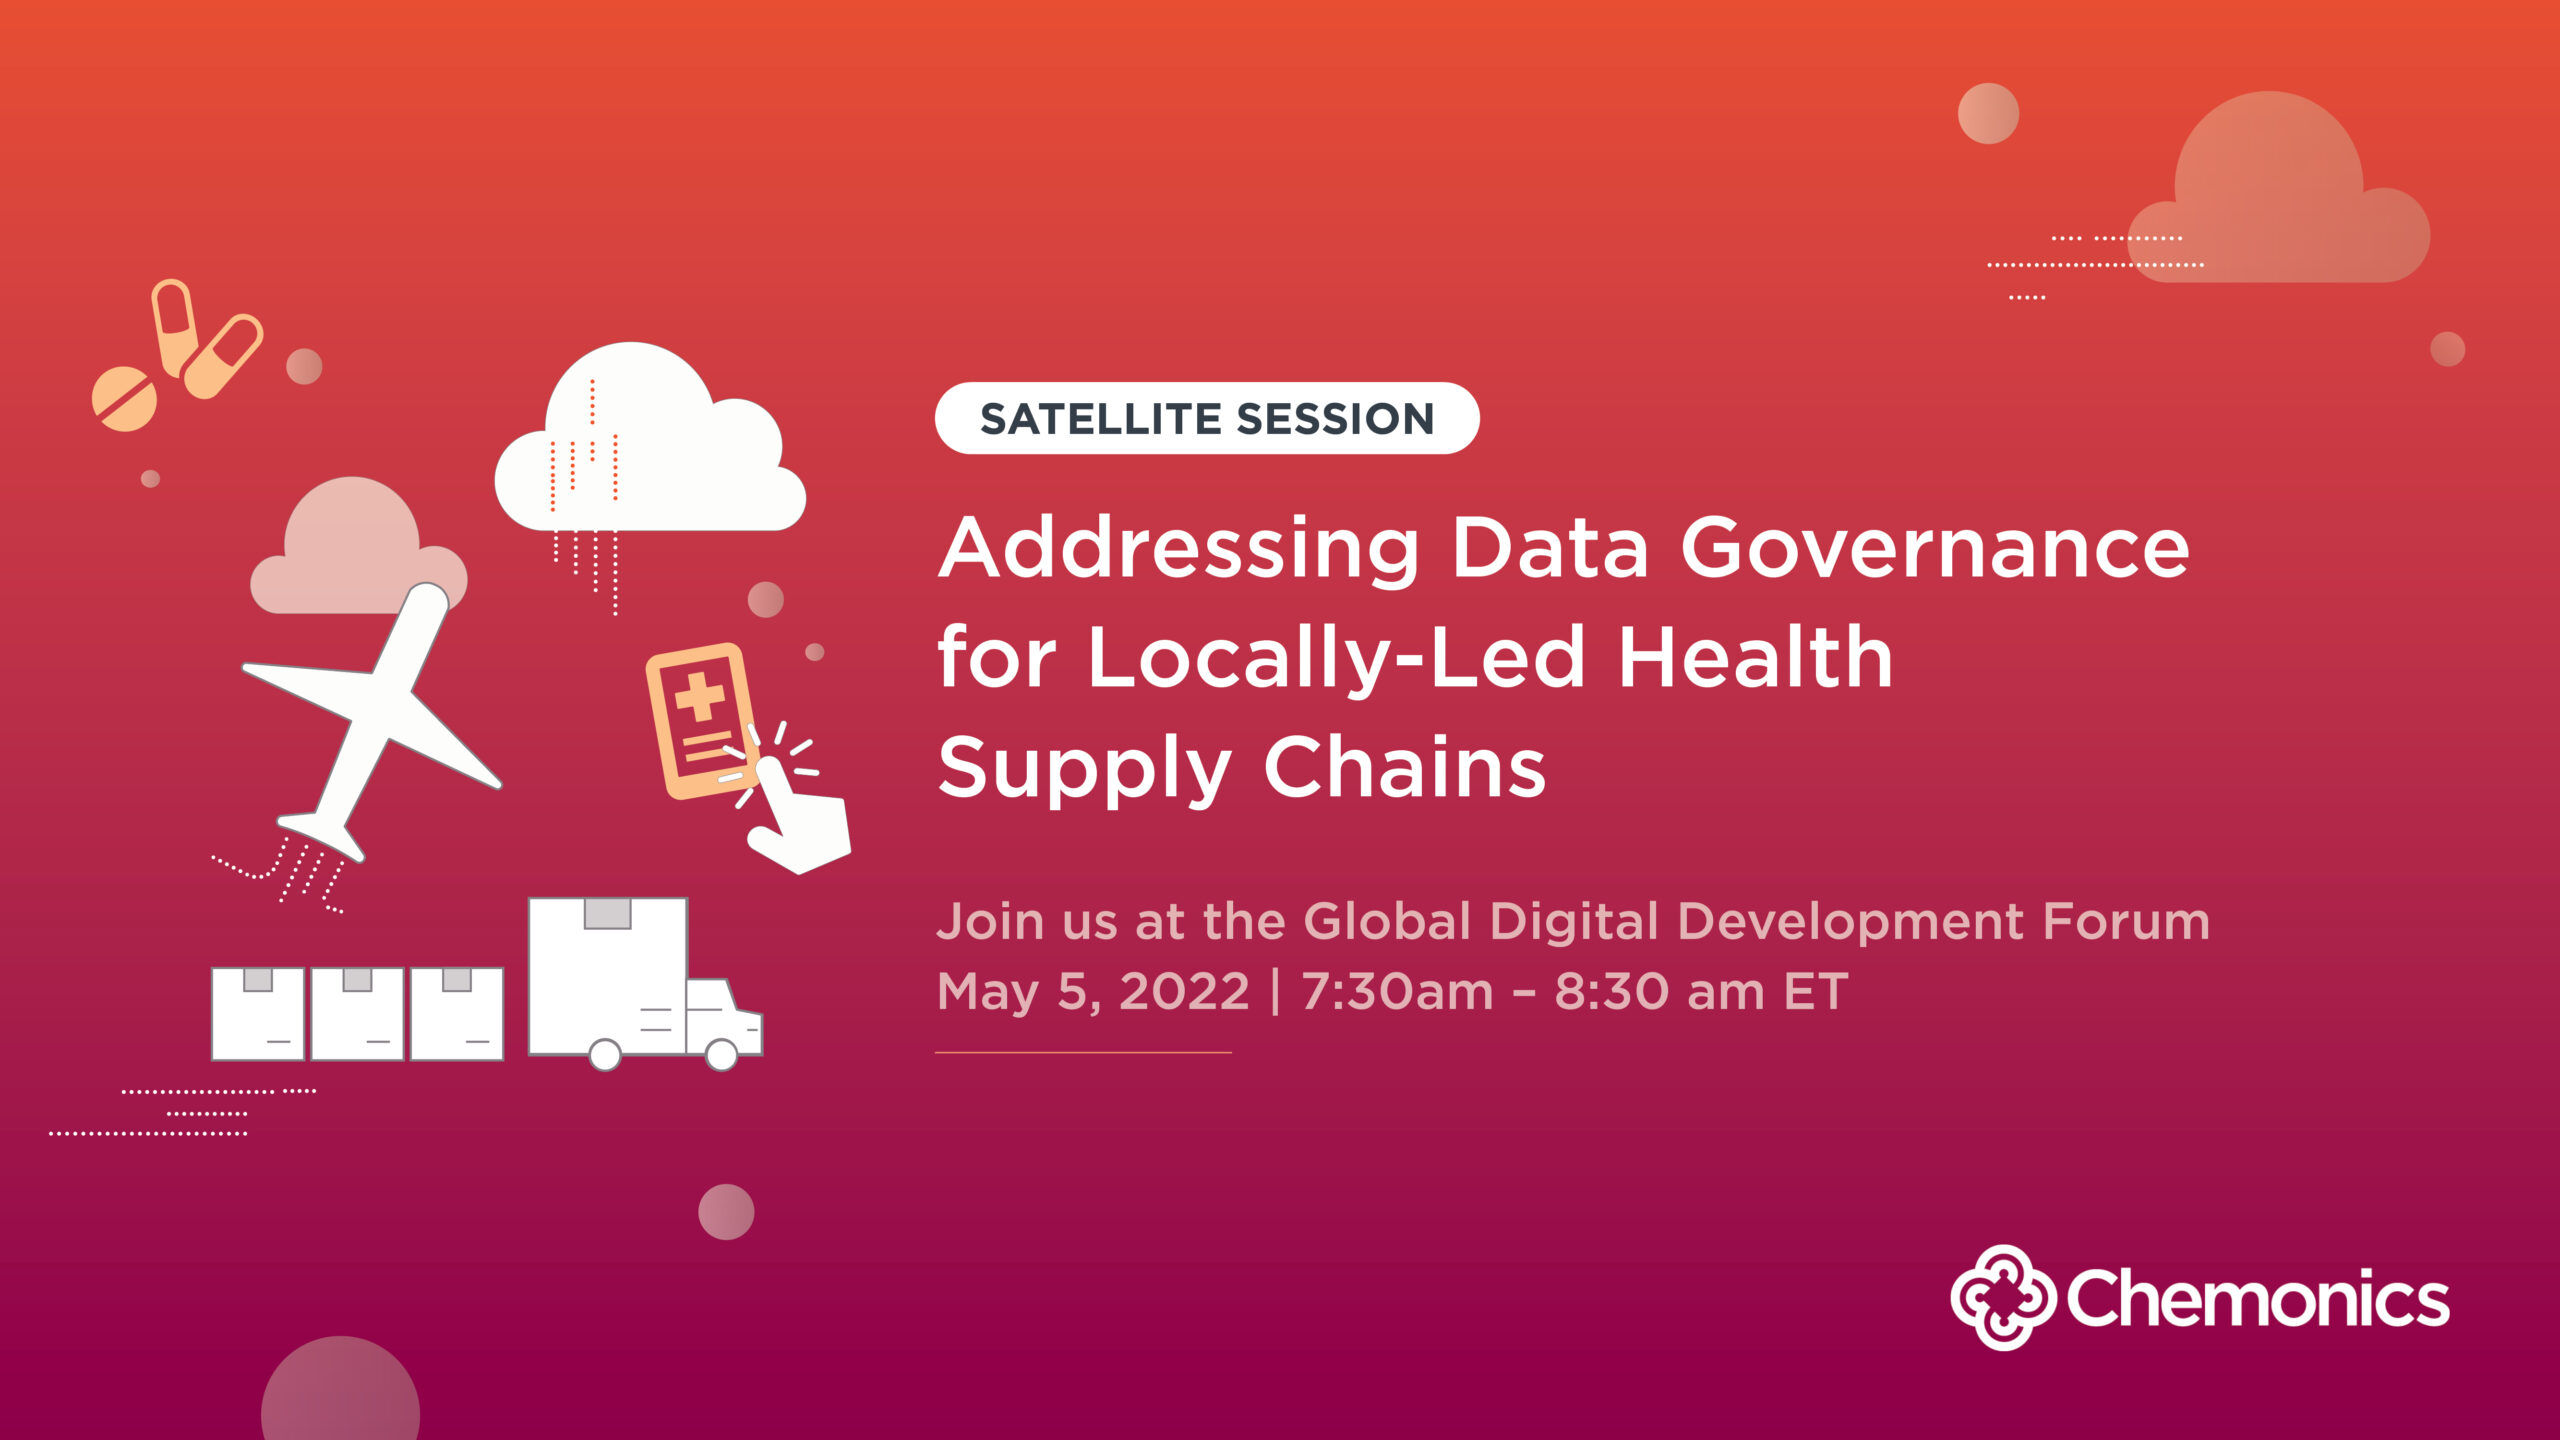 A graphics that says "Satellite Session: Addressing Data Governance for Locally-Led Health Supply Chains" over a red background. Includes illustrations of an airplane, a truck, a smartphone, and medicine.